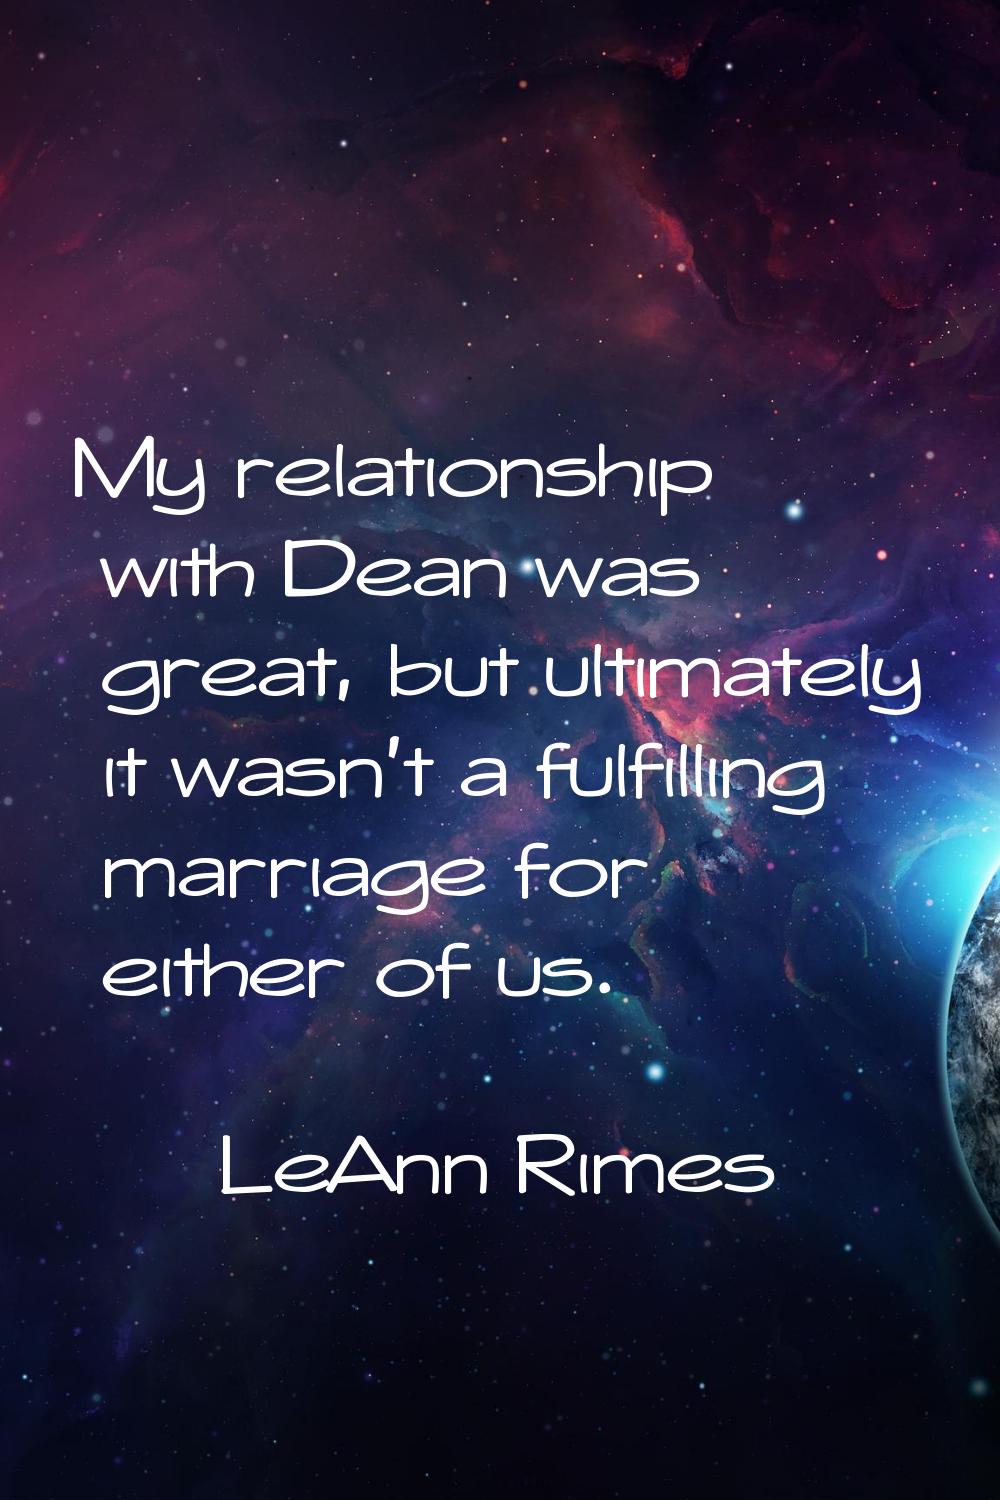 My relationship with Dean was great, but ultimately it wasn't a fulfilling marriage for either of u